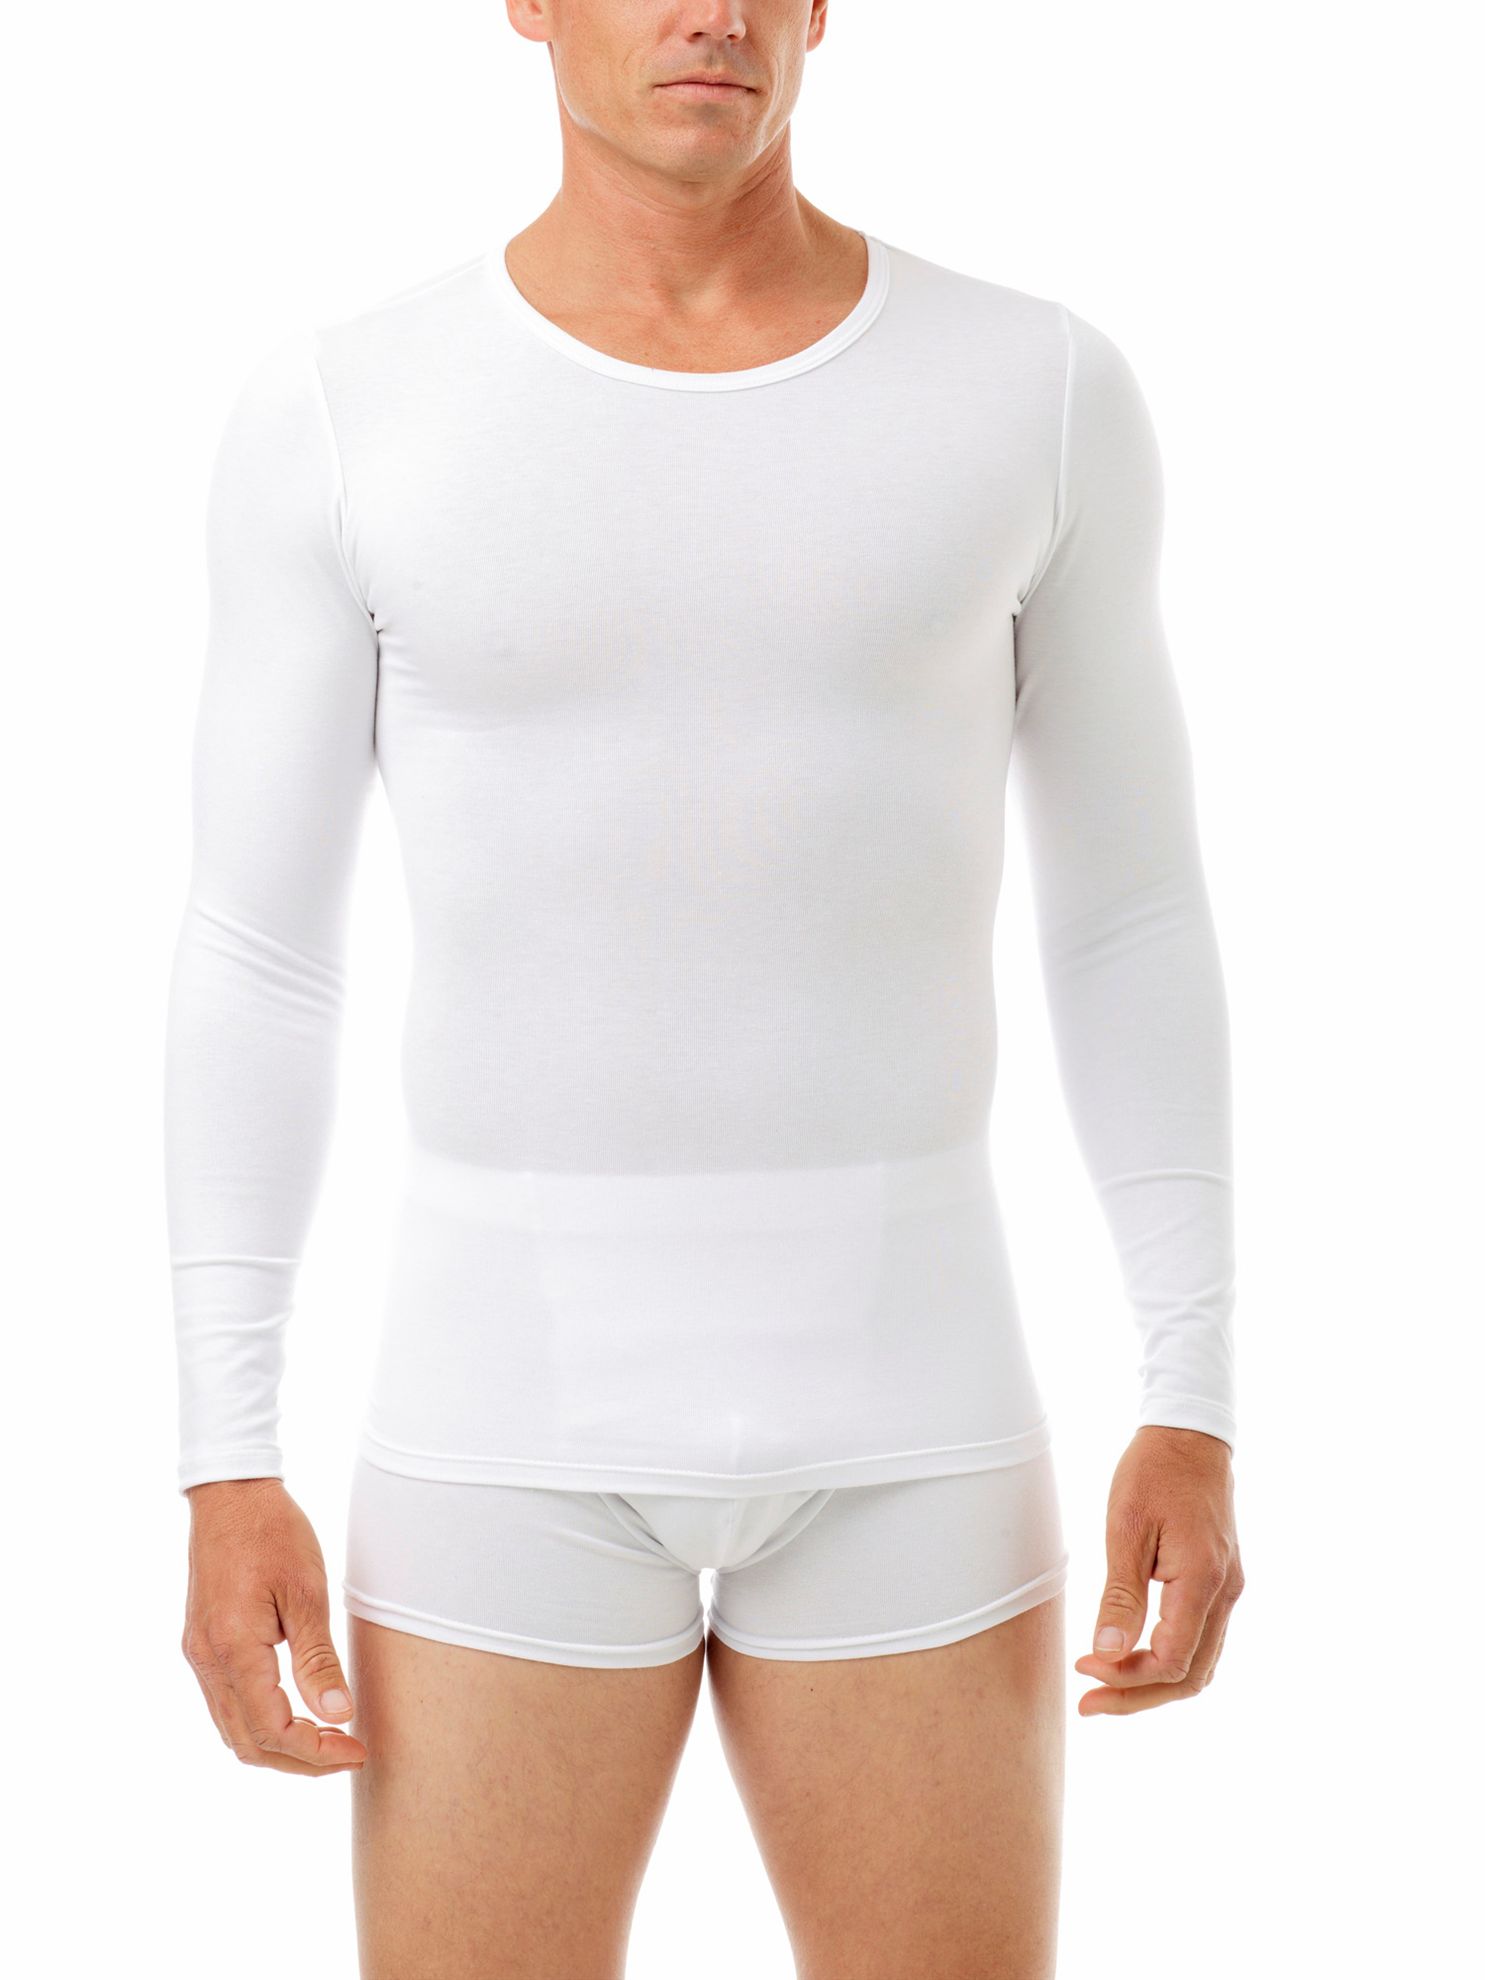 Cotton Compression Muscle Shirt, Free Shipping Over $75